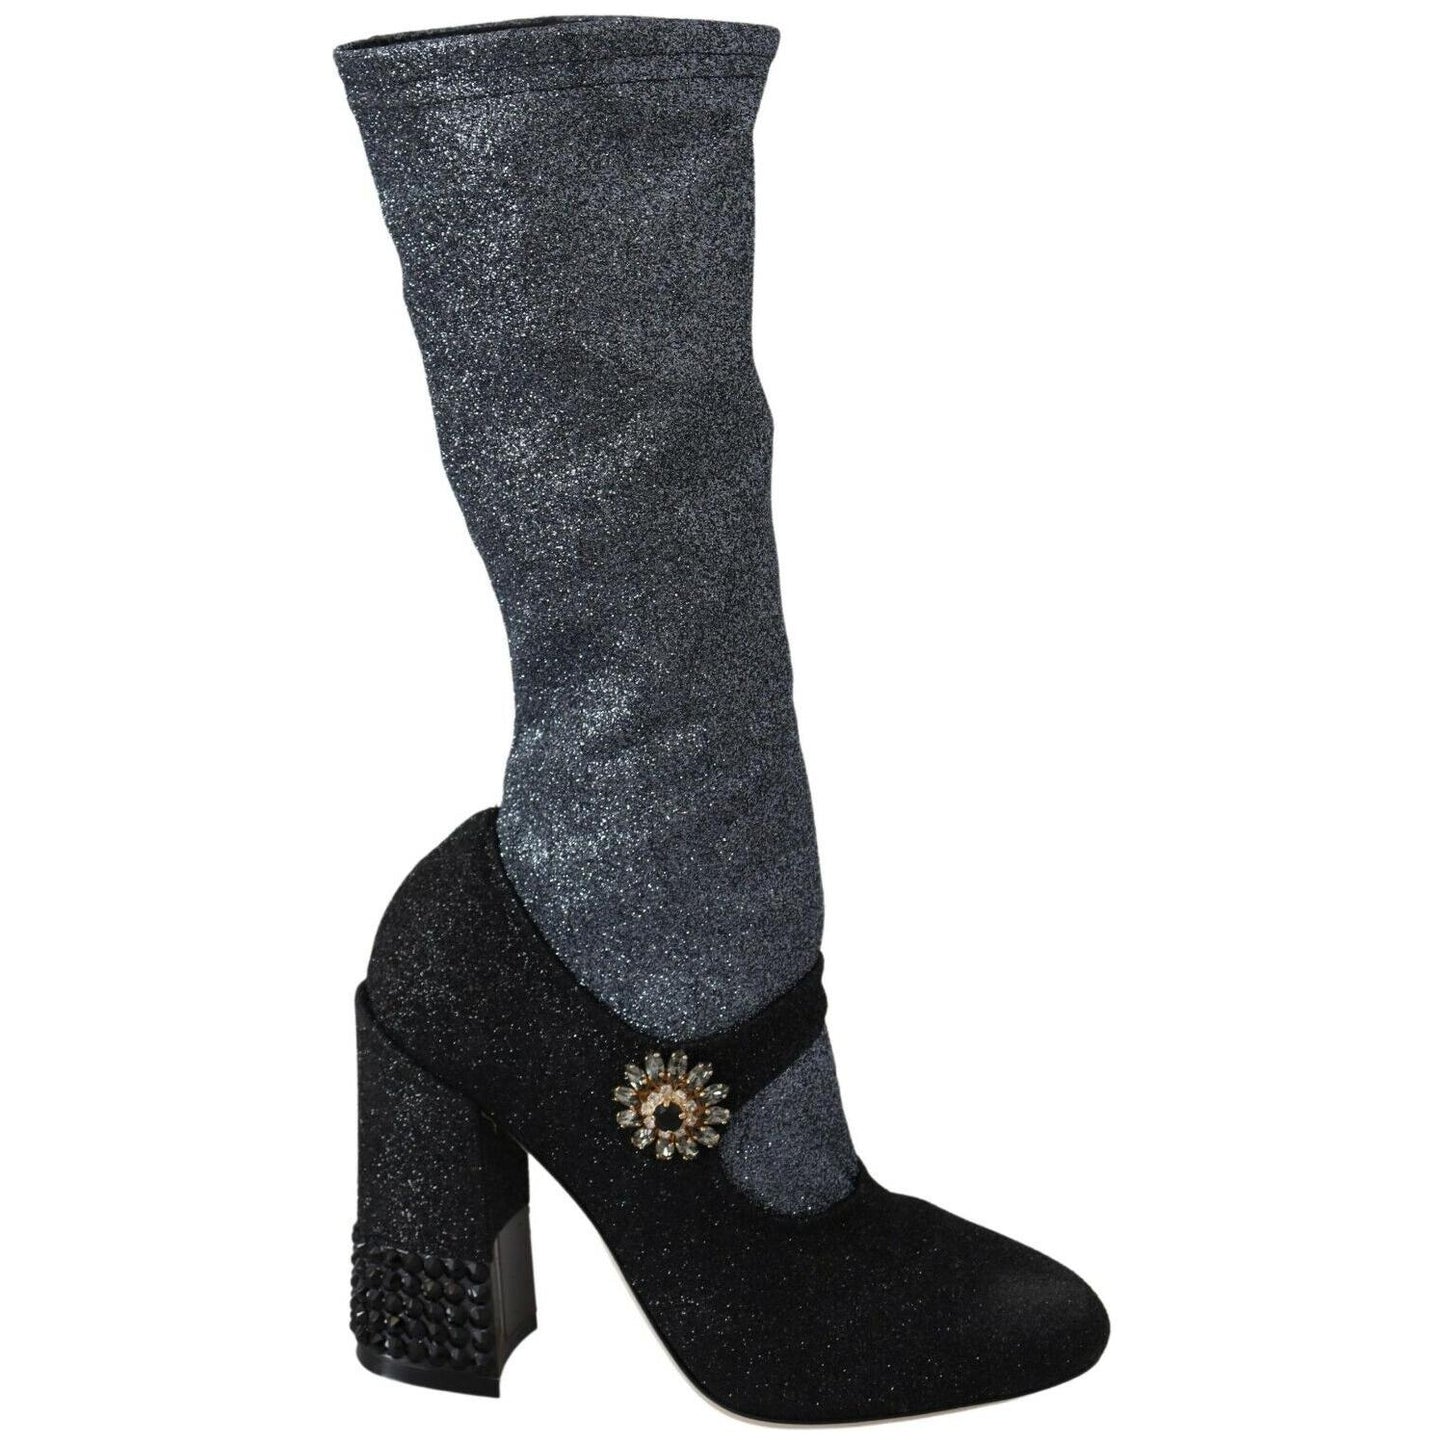 Dolce & Gabbana Glamorous Crystal-Embellished Booties black-crystal-mary-janes-booties-shoes